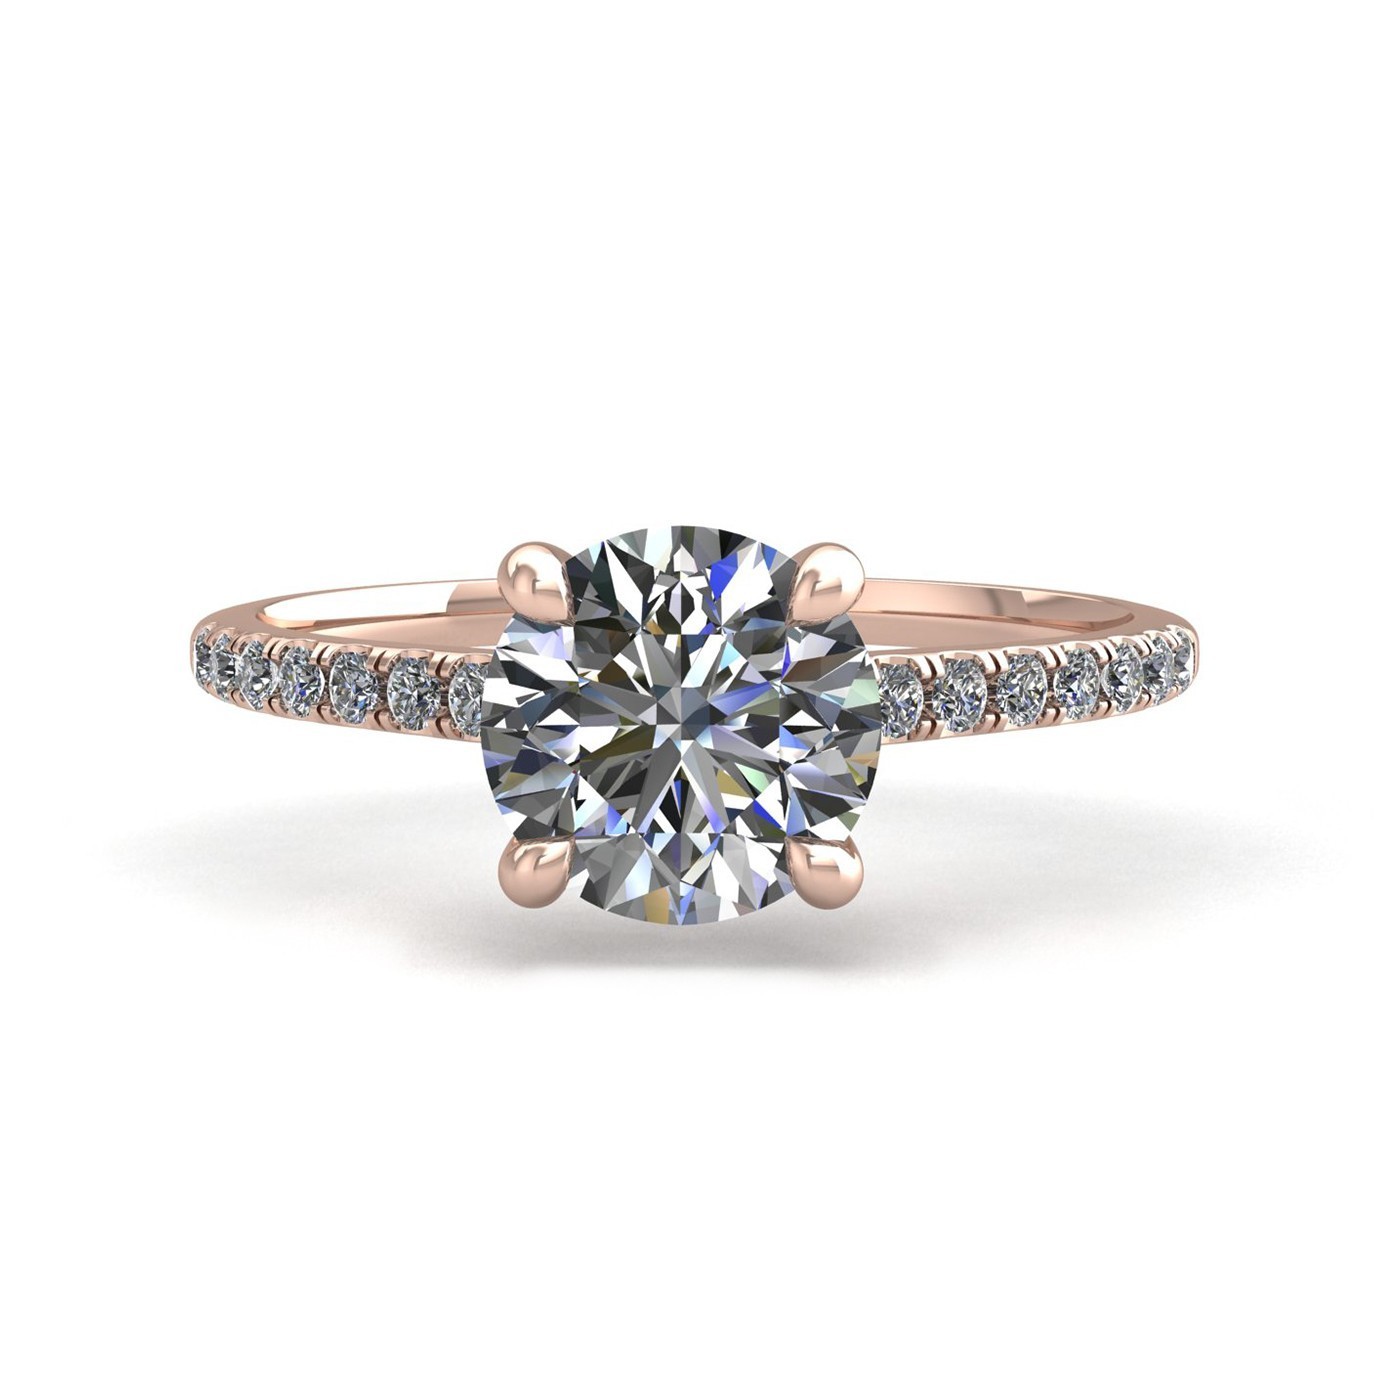 18k rose gold 1.0ct 4 prongs round cut diamond engagement ring with whisper thin pavÉ set band